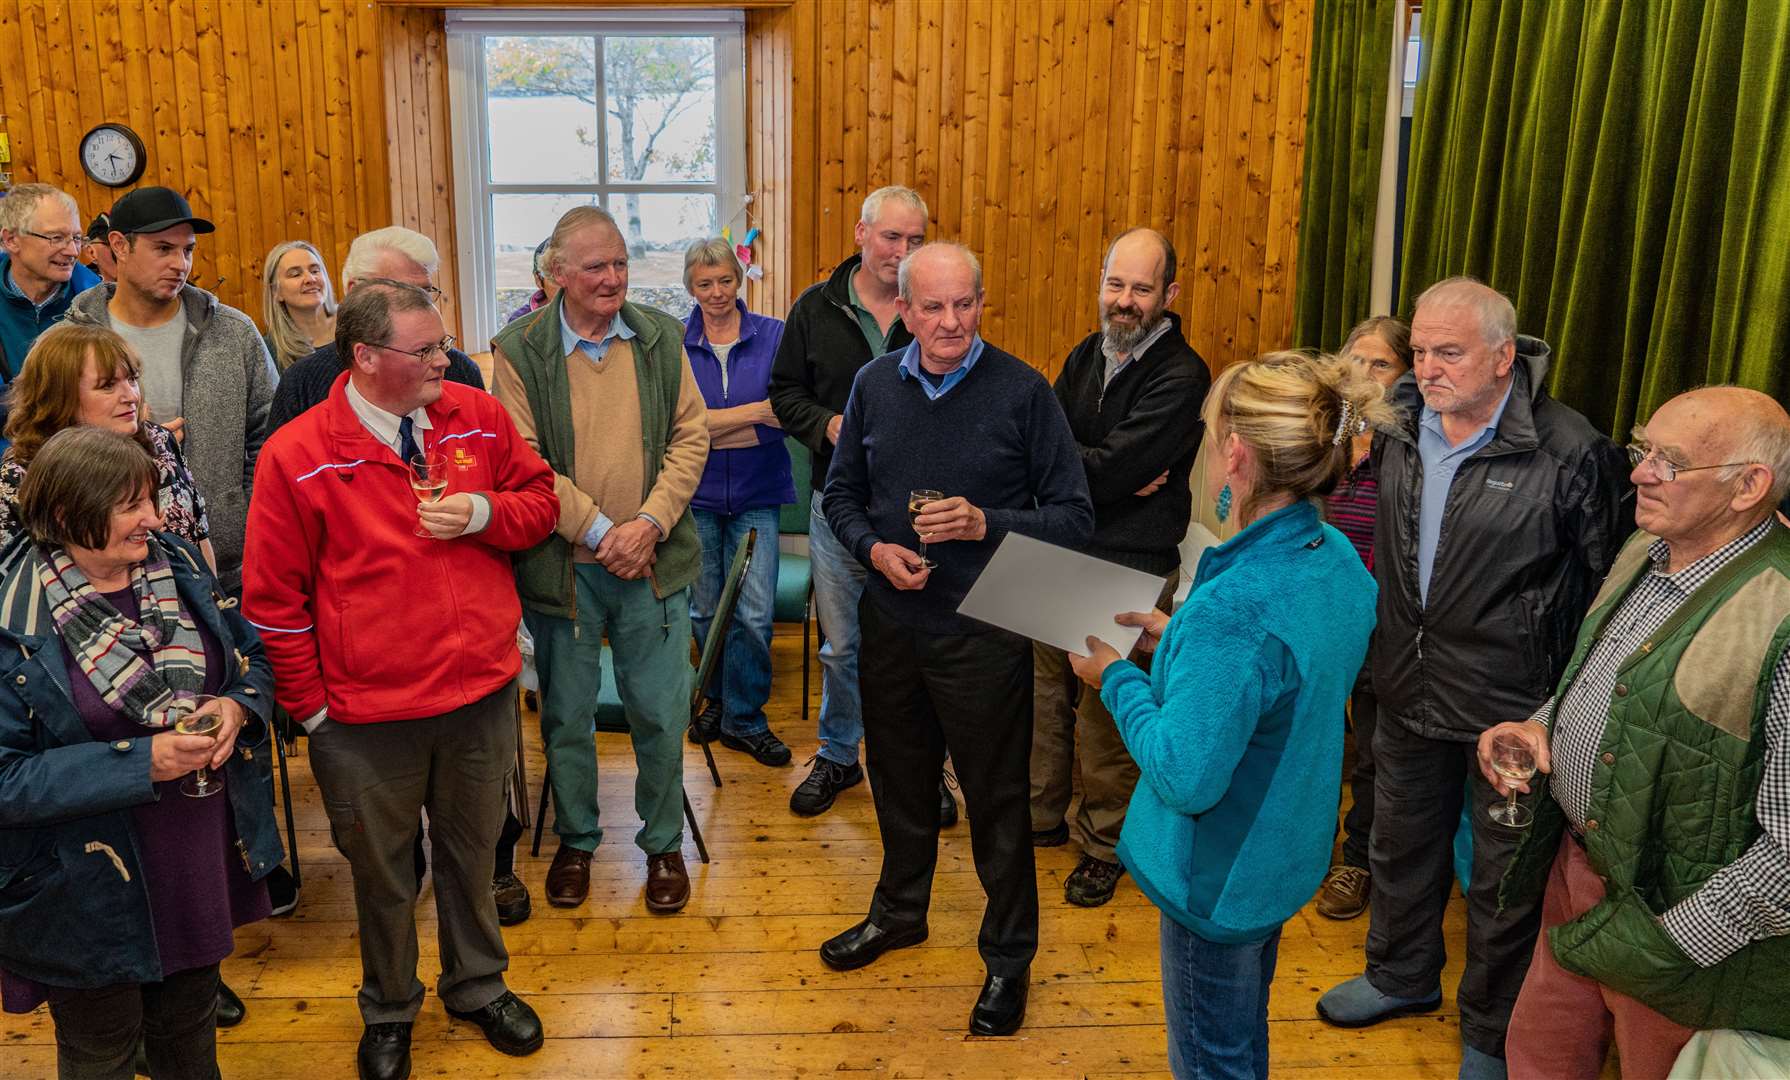 Locals gathereed to wish Iain well and show their gratitude. Picture: Mike Carter.